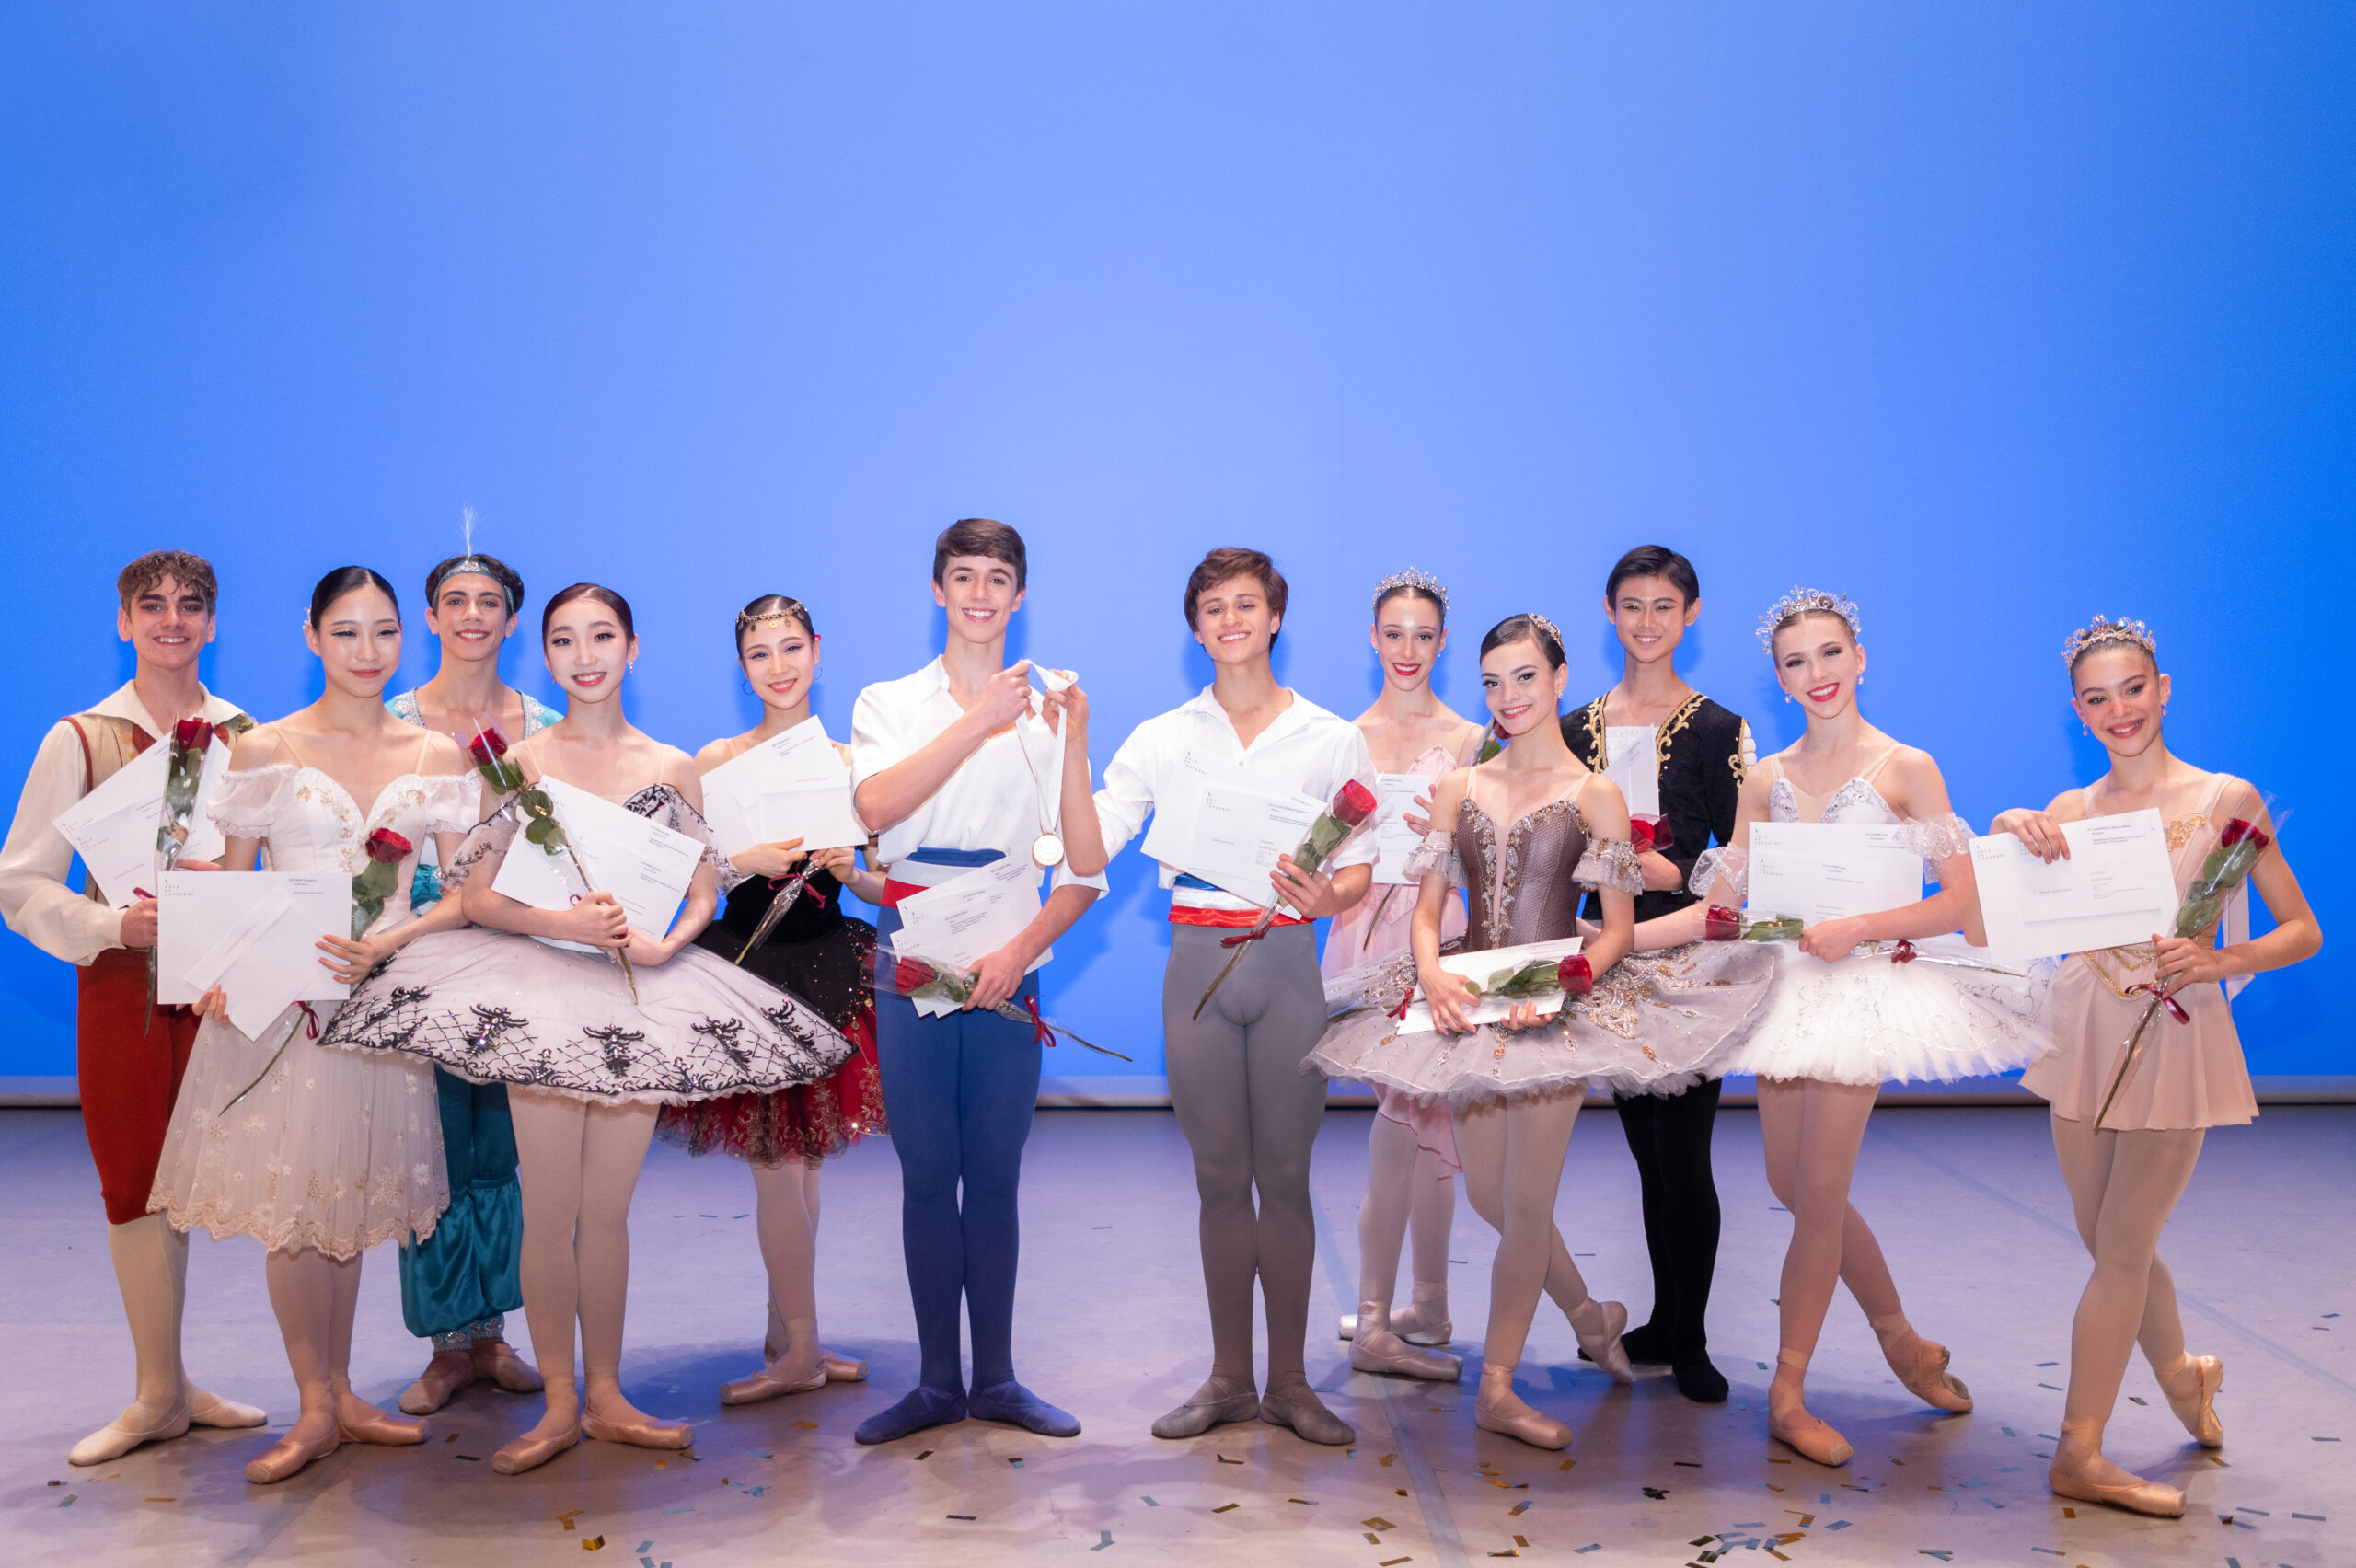 Onstage in front of a light blue backdrop, a group of 12 male and female dancers pose together and smile, wearing various ballet costumes and holding roses and awards. There is confetti at their feet.